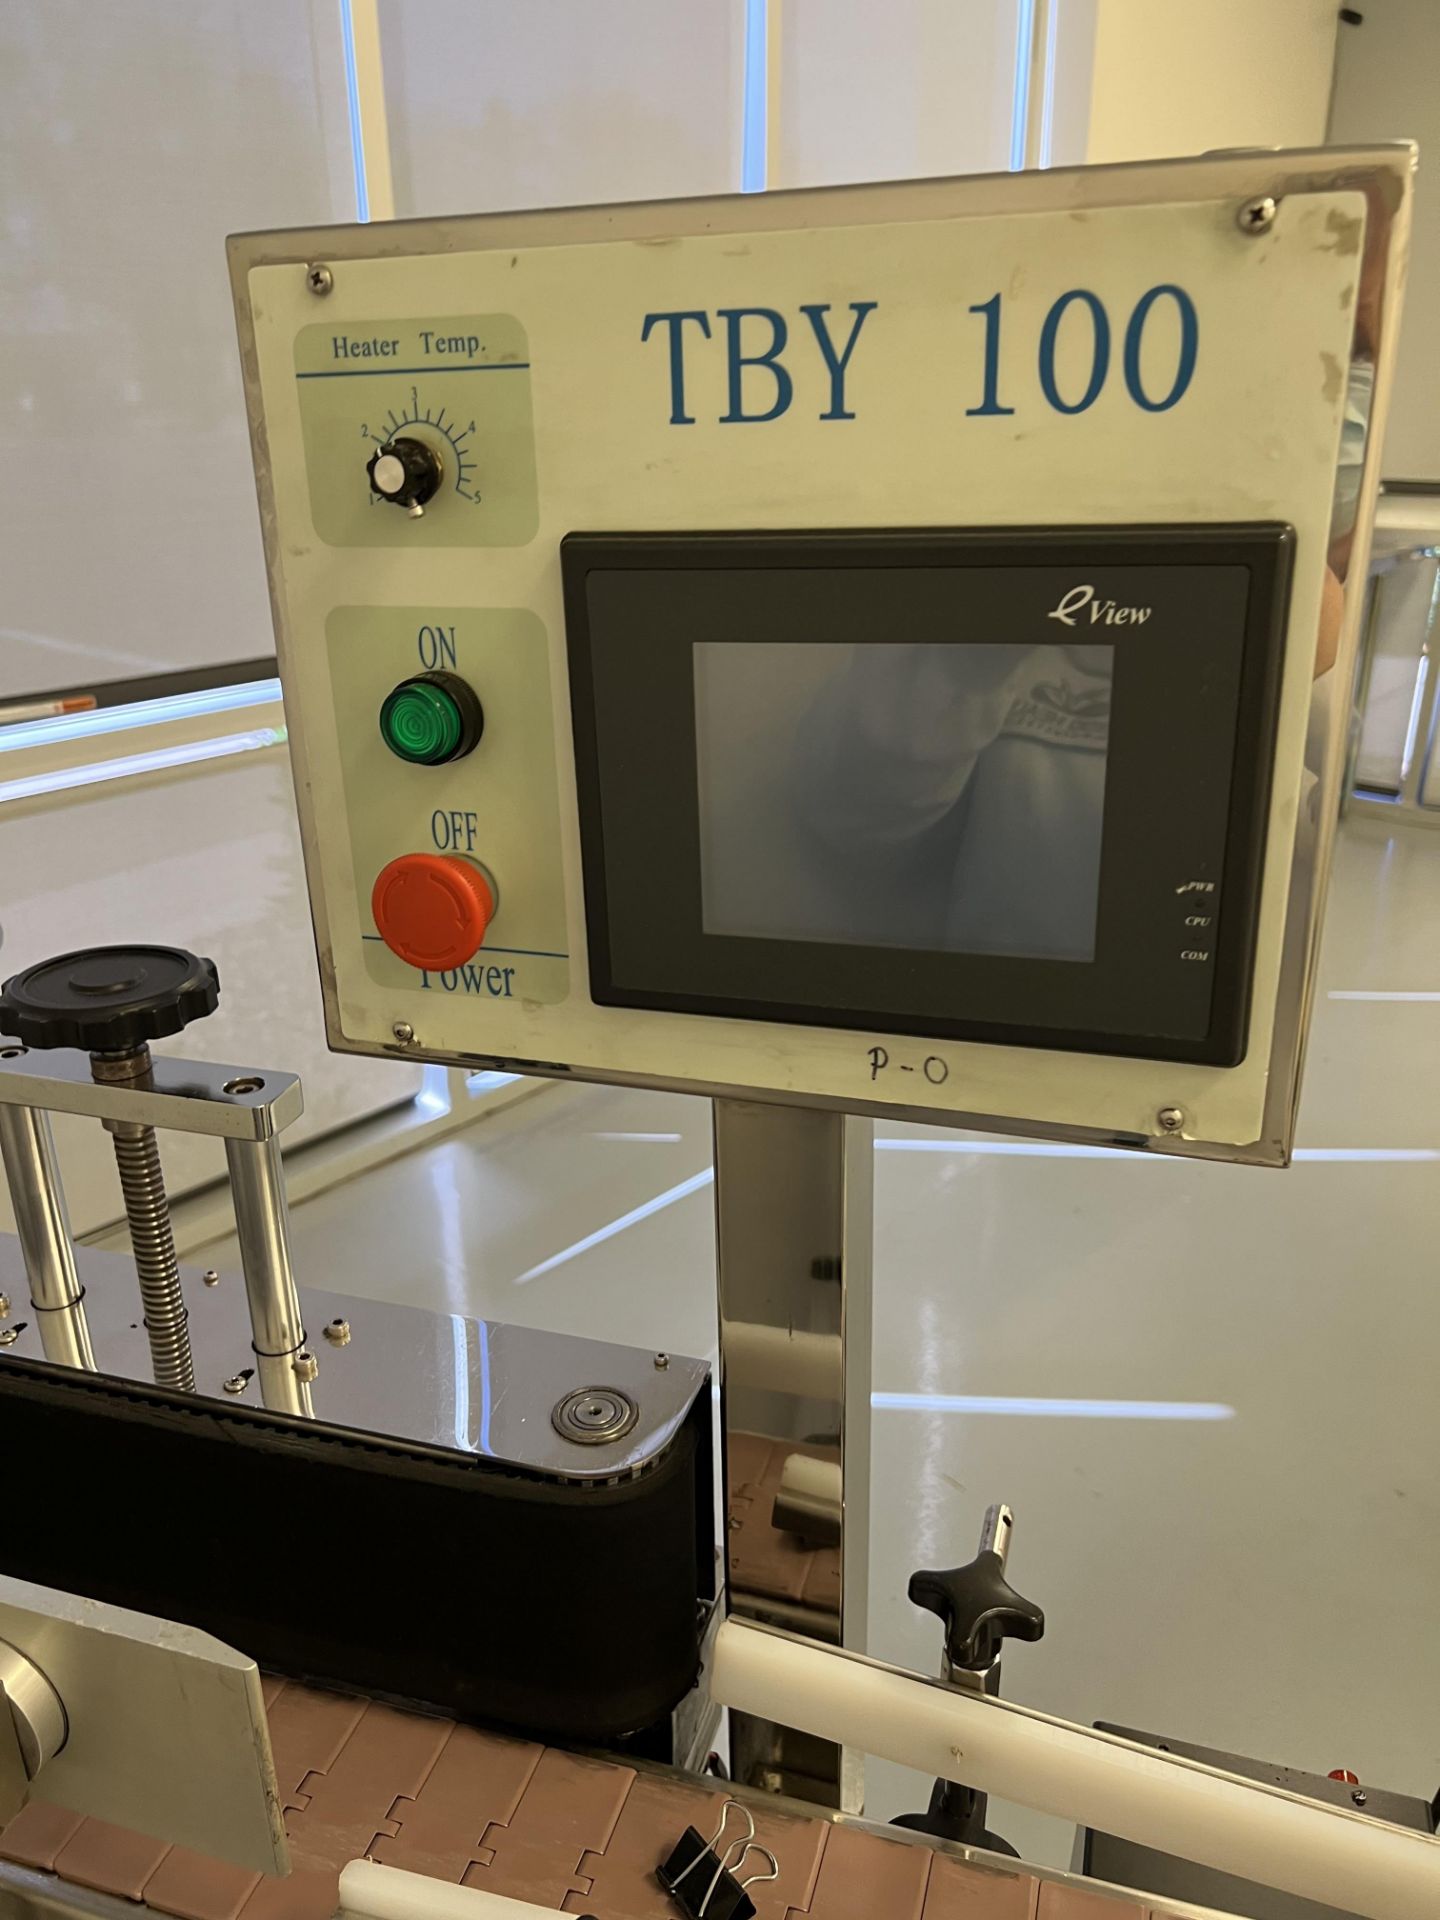 TBY -100 Labeler - Image 2 of 2